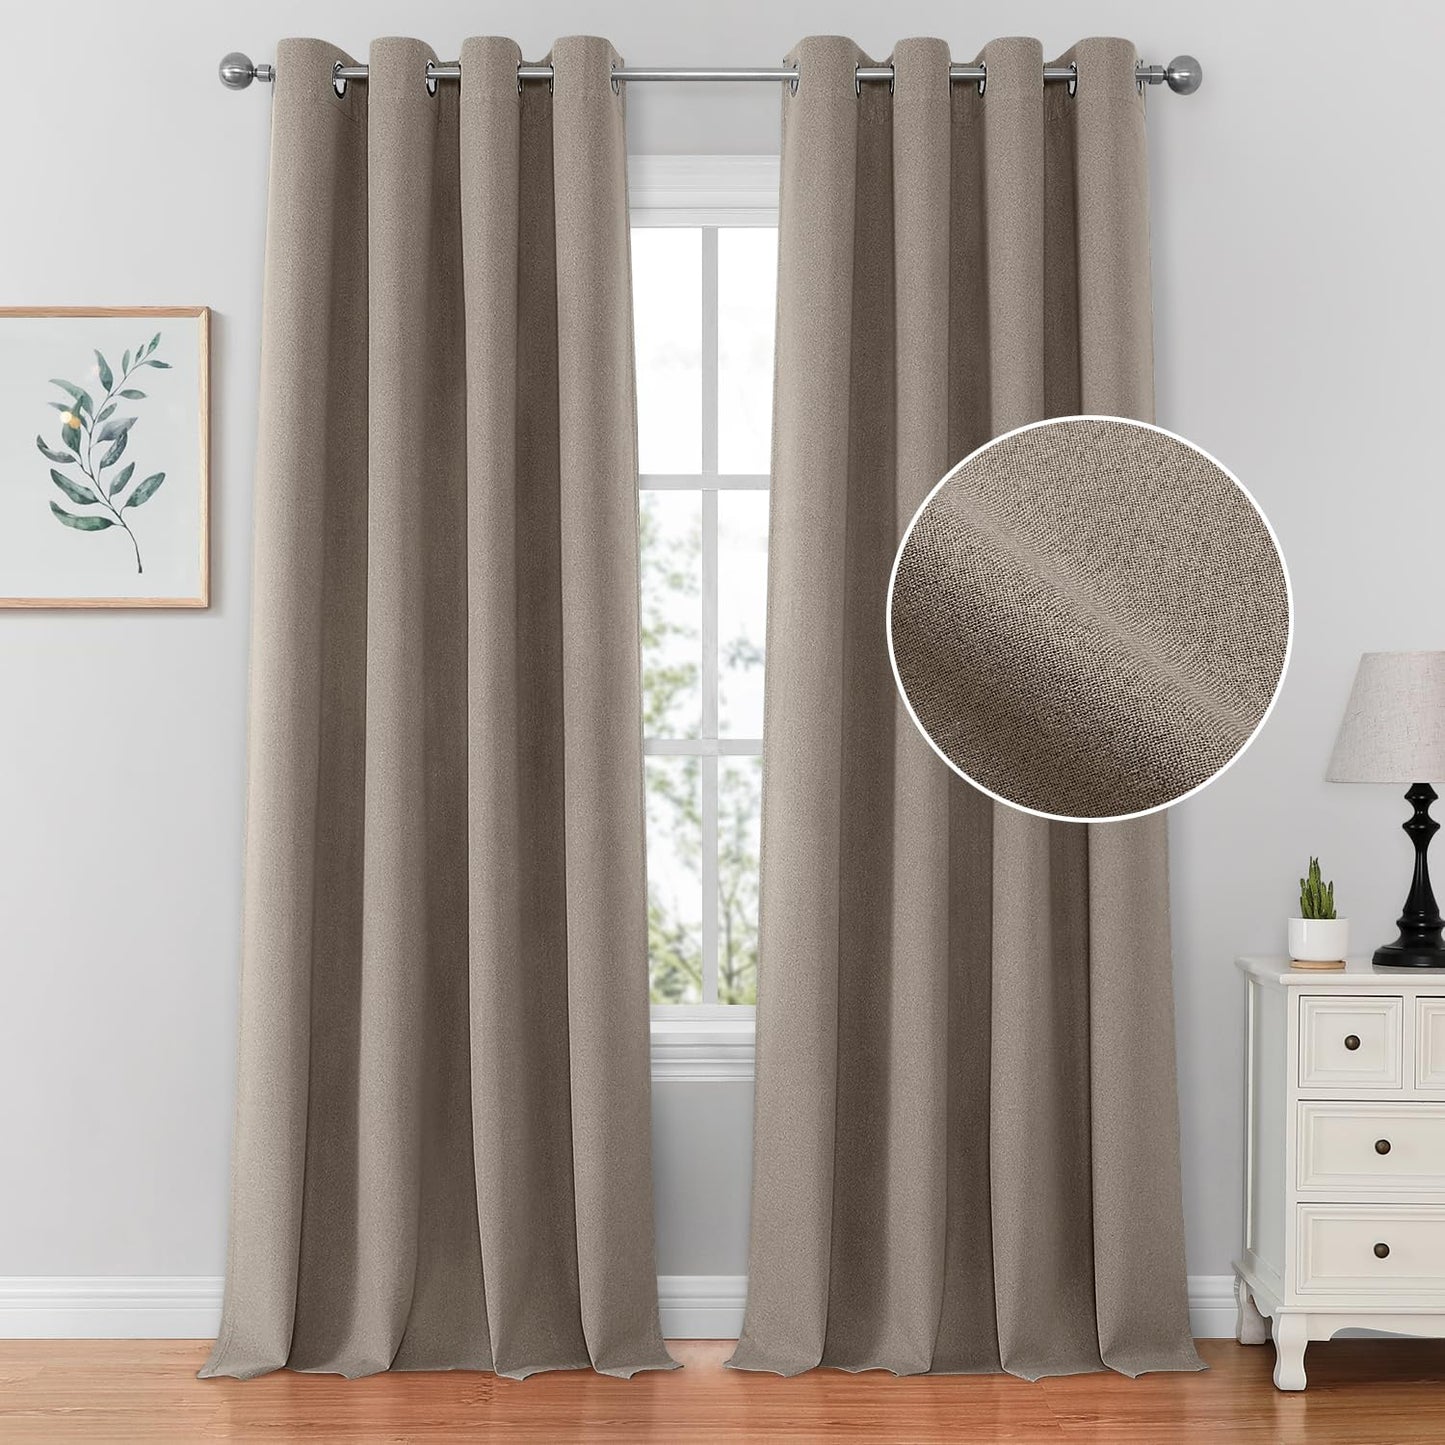 HOMEIDEAS 100% Blush Pink Linen Blackout Curtains for Bedroom, 52 X 84 Inch Room Darkening Curtains for Living, Faux Linen Thermal Insulated Full Black Out Grommet Window Curtains/Drapes  HOMEIDEAS Natural W52" X L84" 